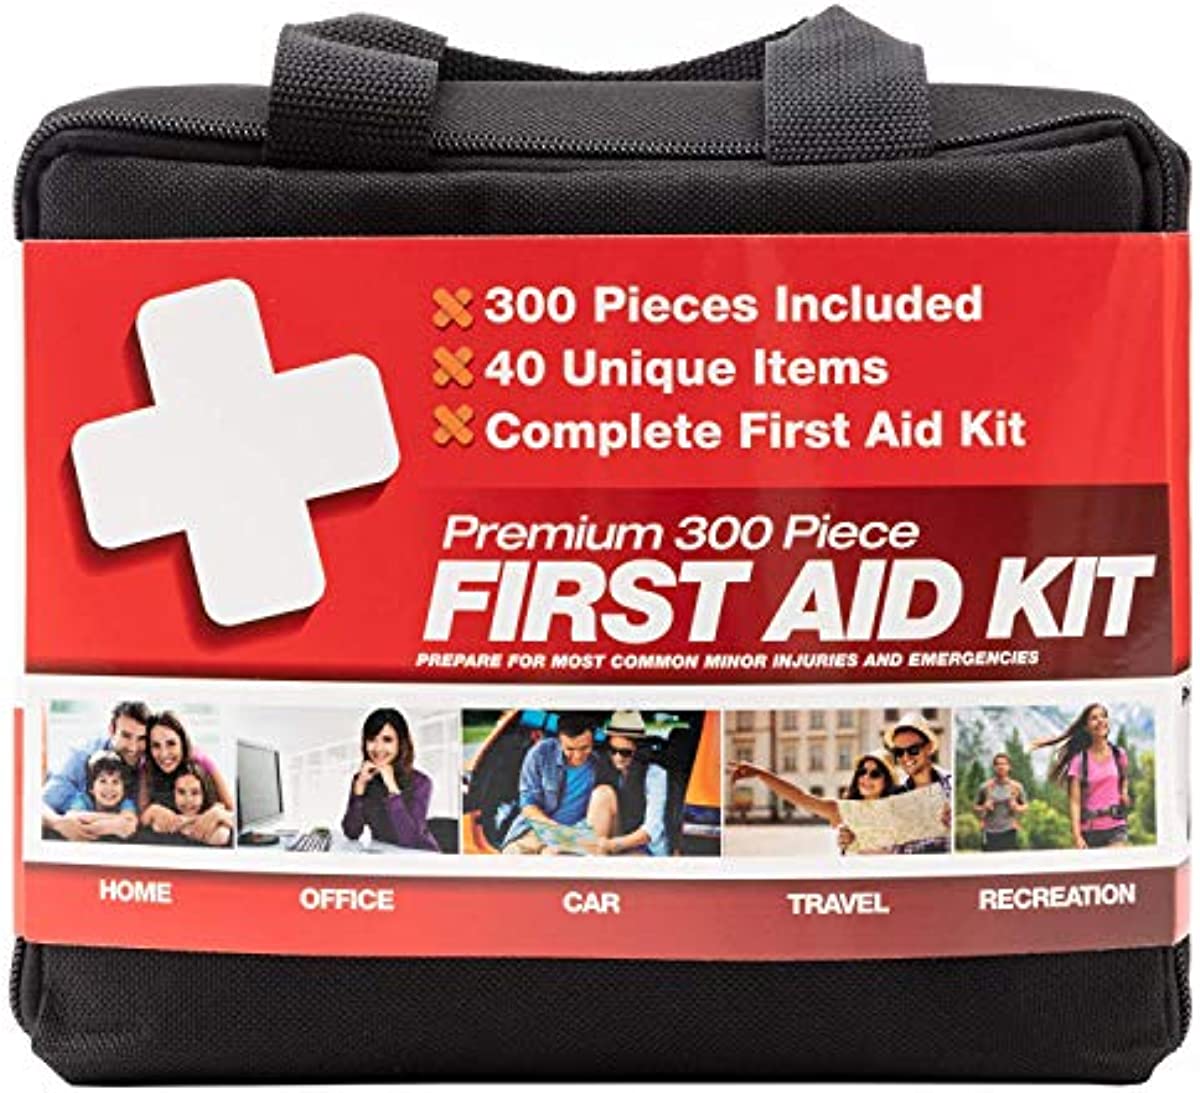 M2 BASICS 300 Piece (40 Unique Items) First Aid Kit | Premium Emergency Kits | Home, Camping, Car, Office, Travel, Vehicle, Survival